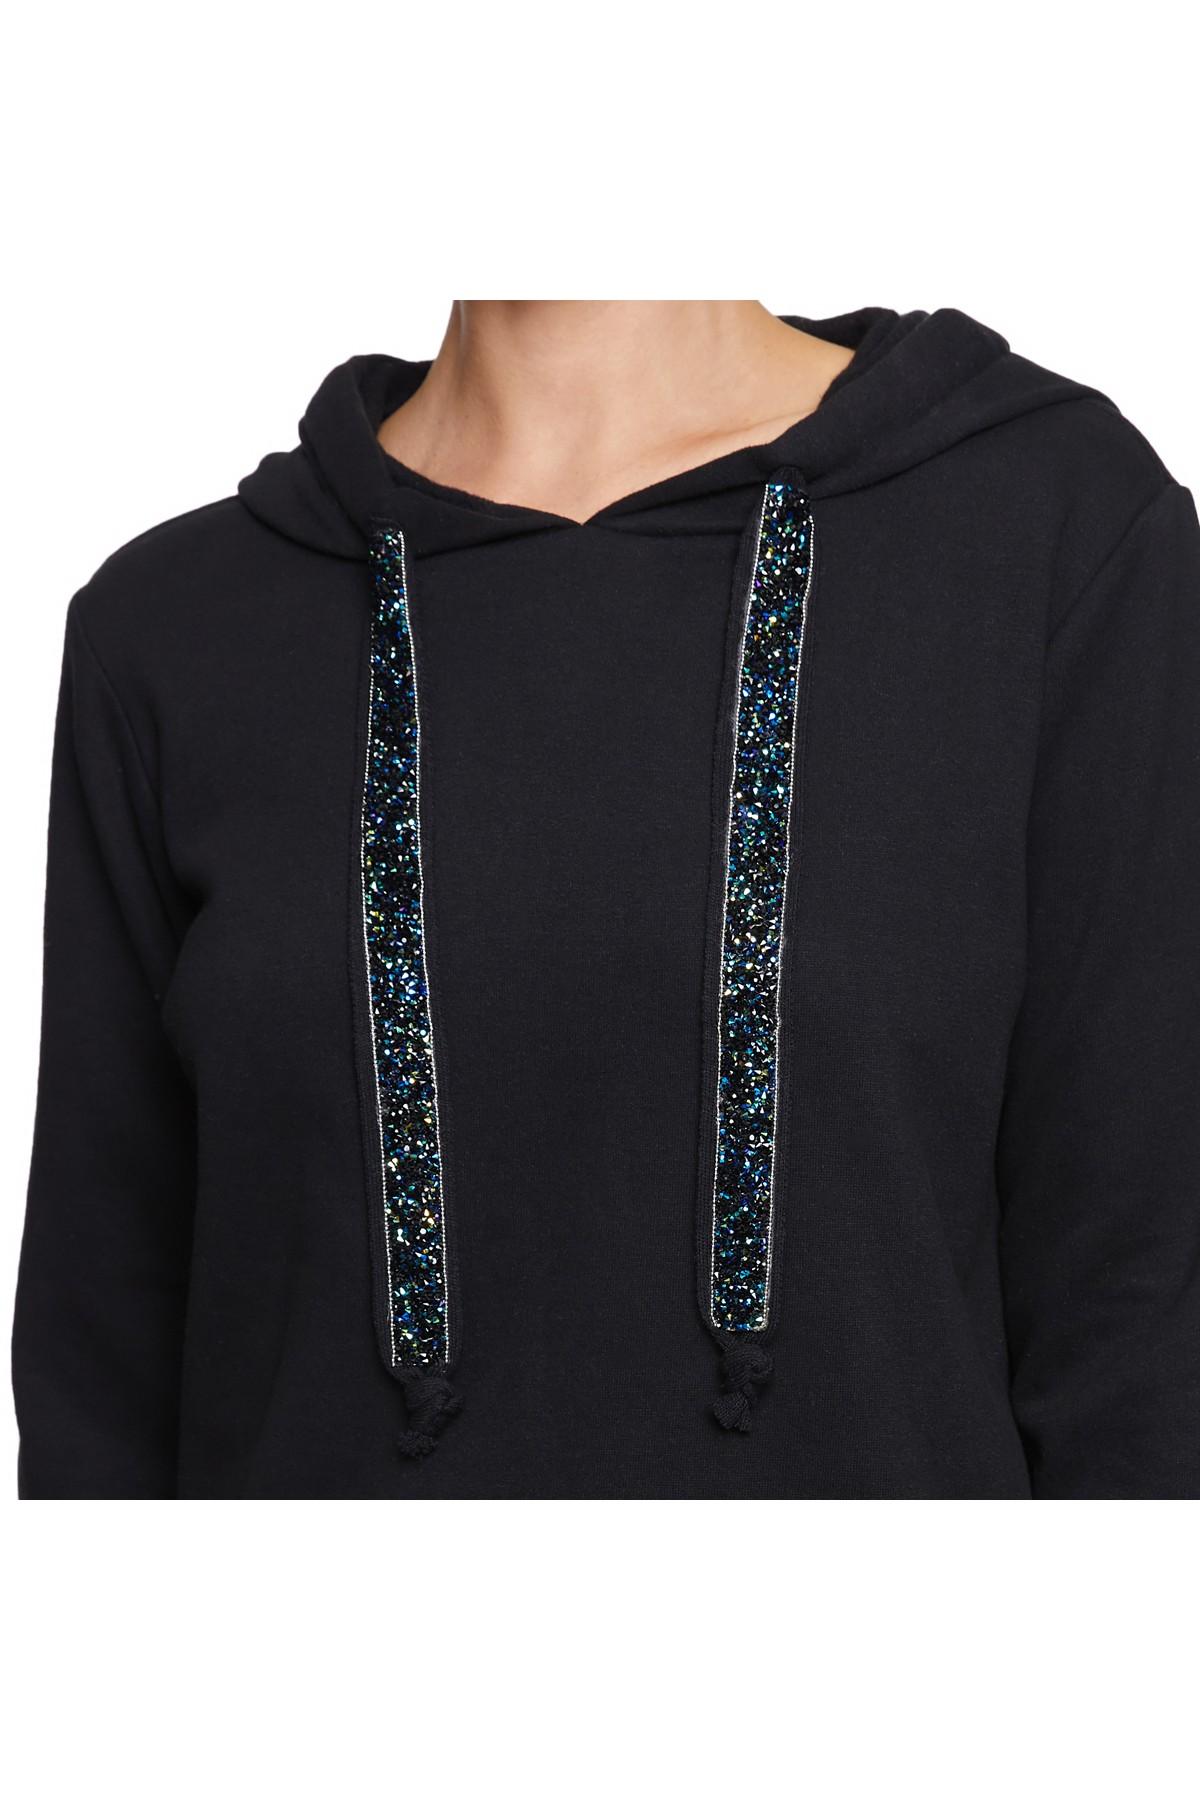 Betsey Johnson Sparkle Drawstring Pullover Hoodie in Black | Lyst